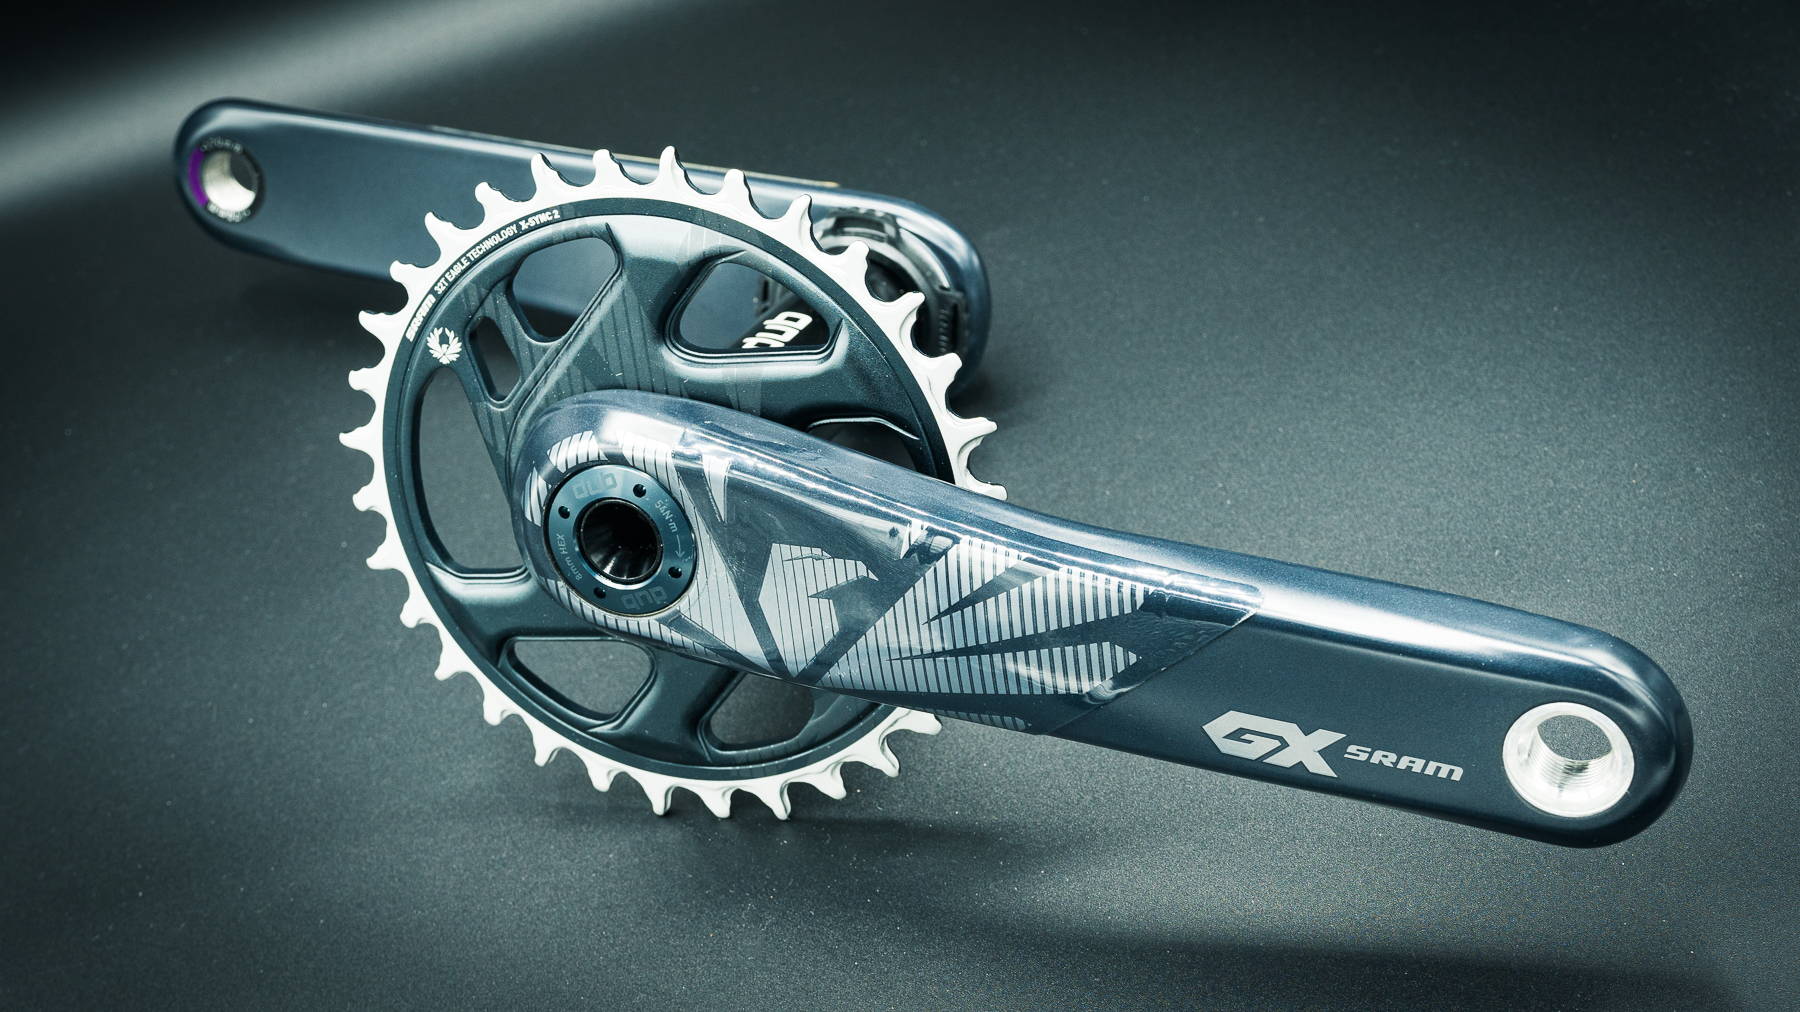 SRAM GX Eagle Carbon Boost Crankset not on a bike in detail